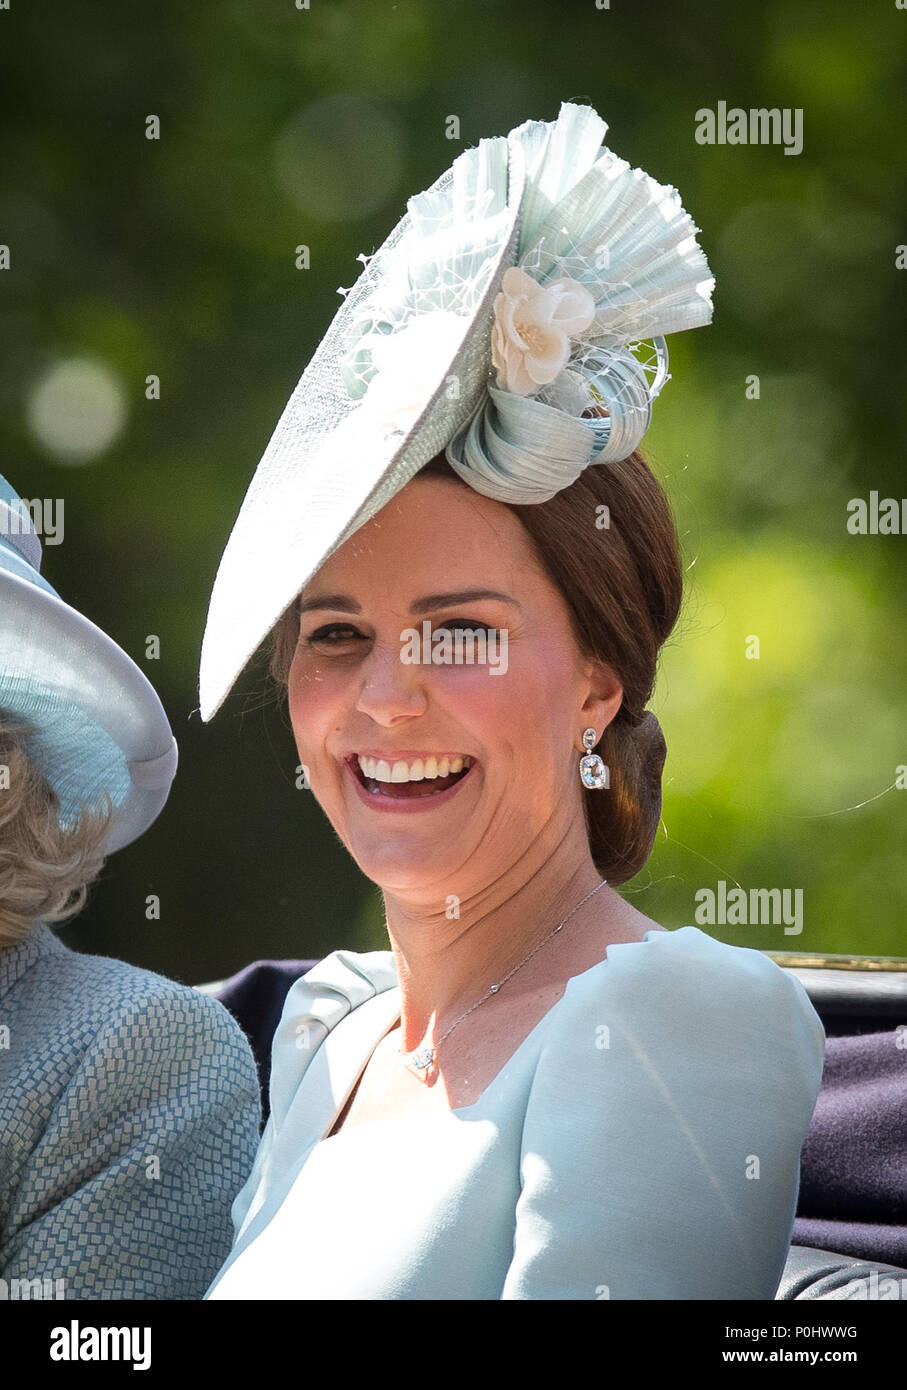 London, UK, 9 June 2018. Catherine, Duchess of Cambridge (Kate Middleton) during Trooping the Colour - Queen Elizabeth II Birthday Parade 2018 at The Mall, Buckingham Palace, England on 9 June 2018. Photo by Andy Rowland. Credit: Andrew Rowland/Alamy Live News Credit: Andrew Rowland/Alamy Live News Credit: Andrew Rowland/Alamy Live News Stock Photo